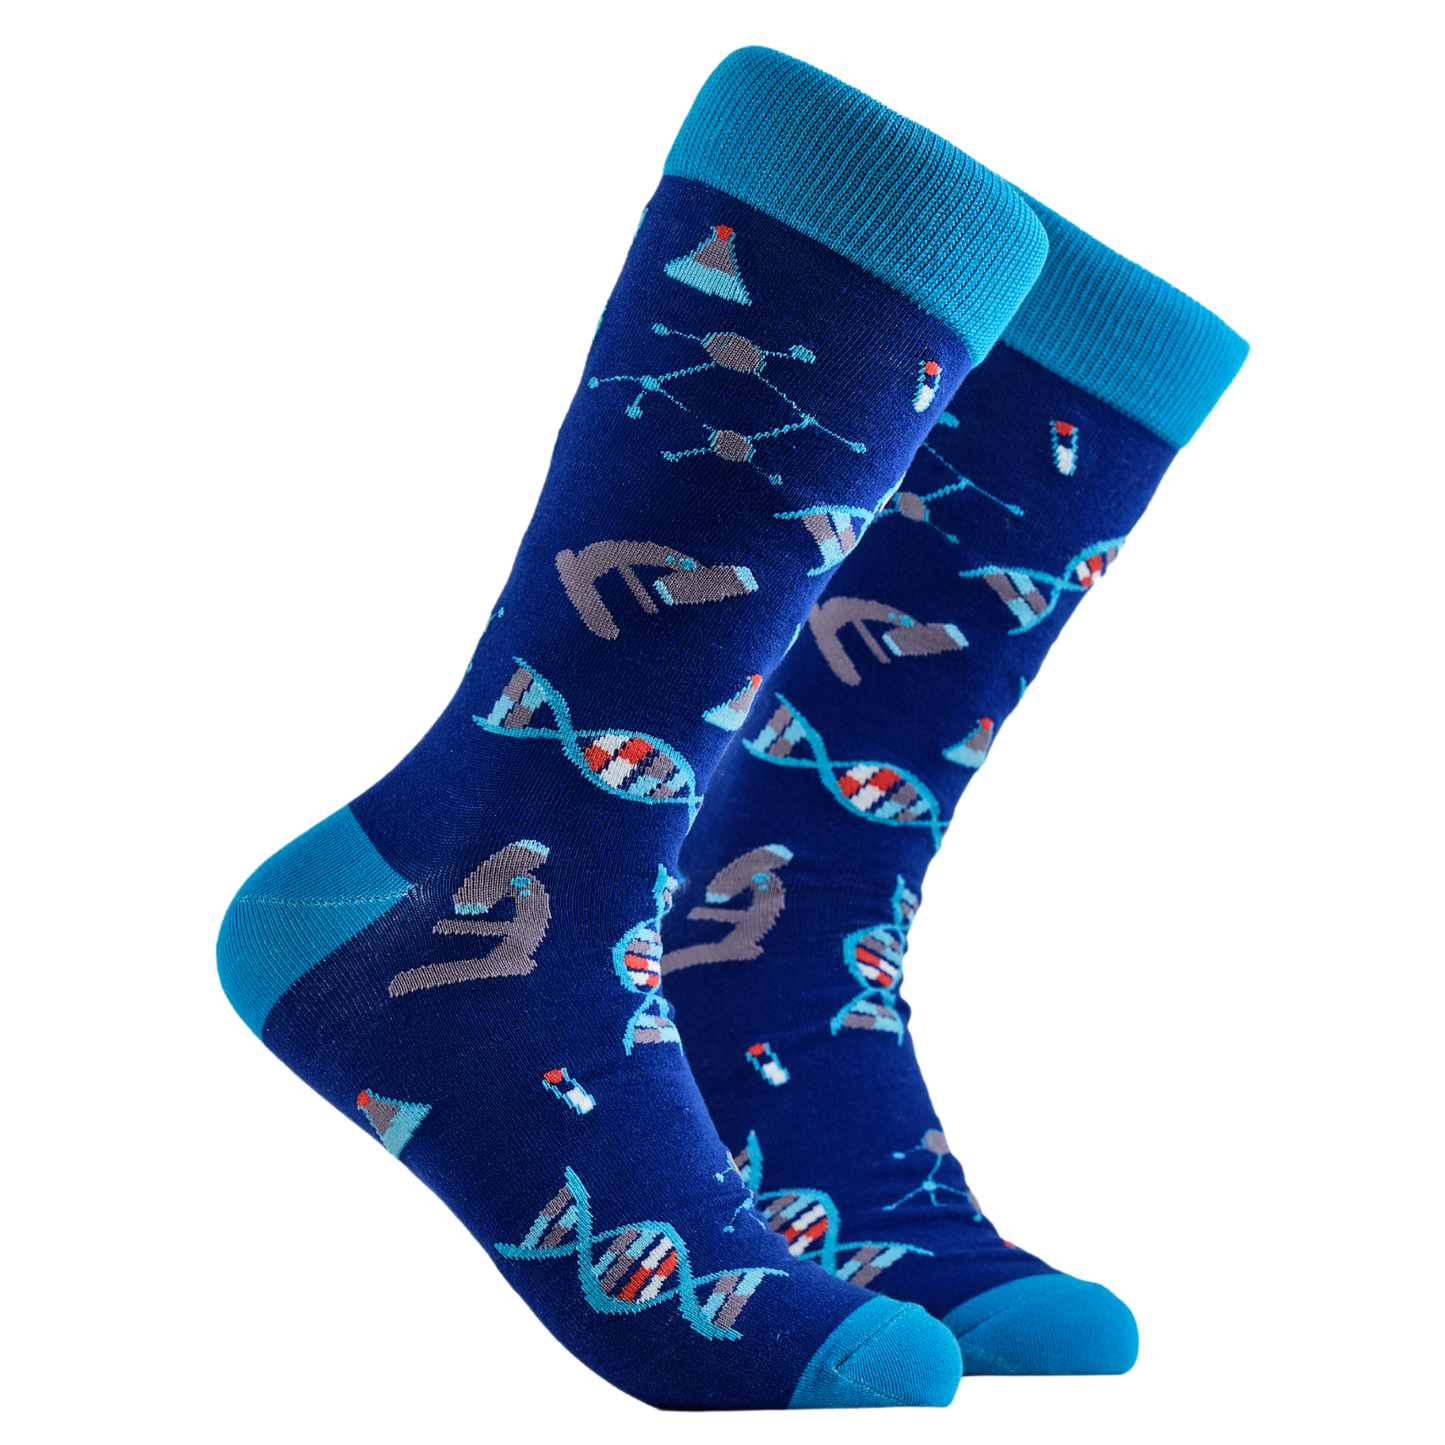 DNA Socks. A pair of socks depicting DNA and microscopes. Blue legs, light blue cuff, heel and toe.